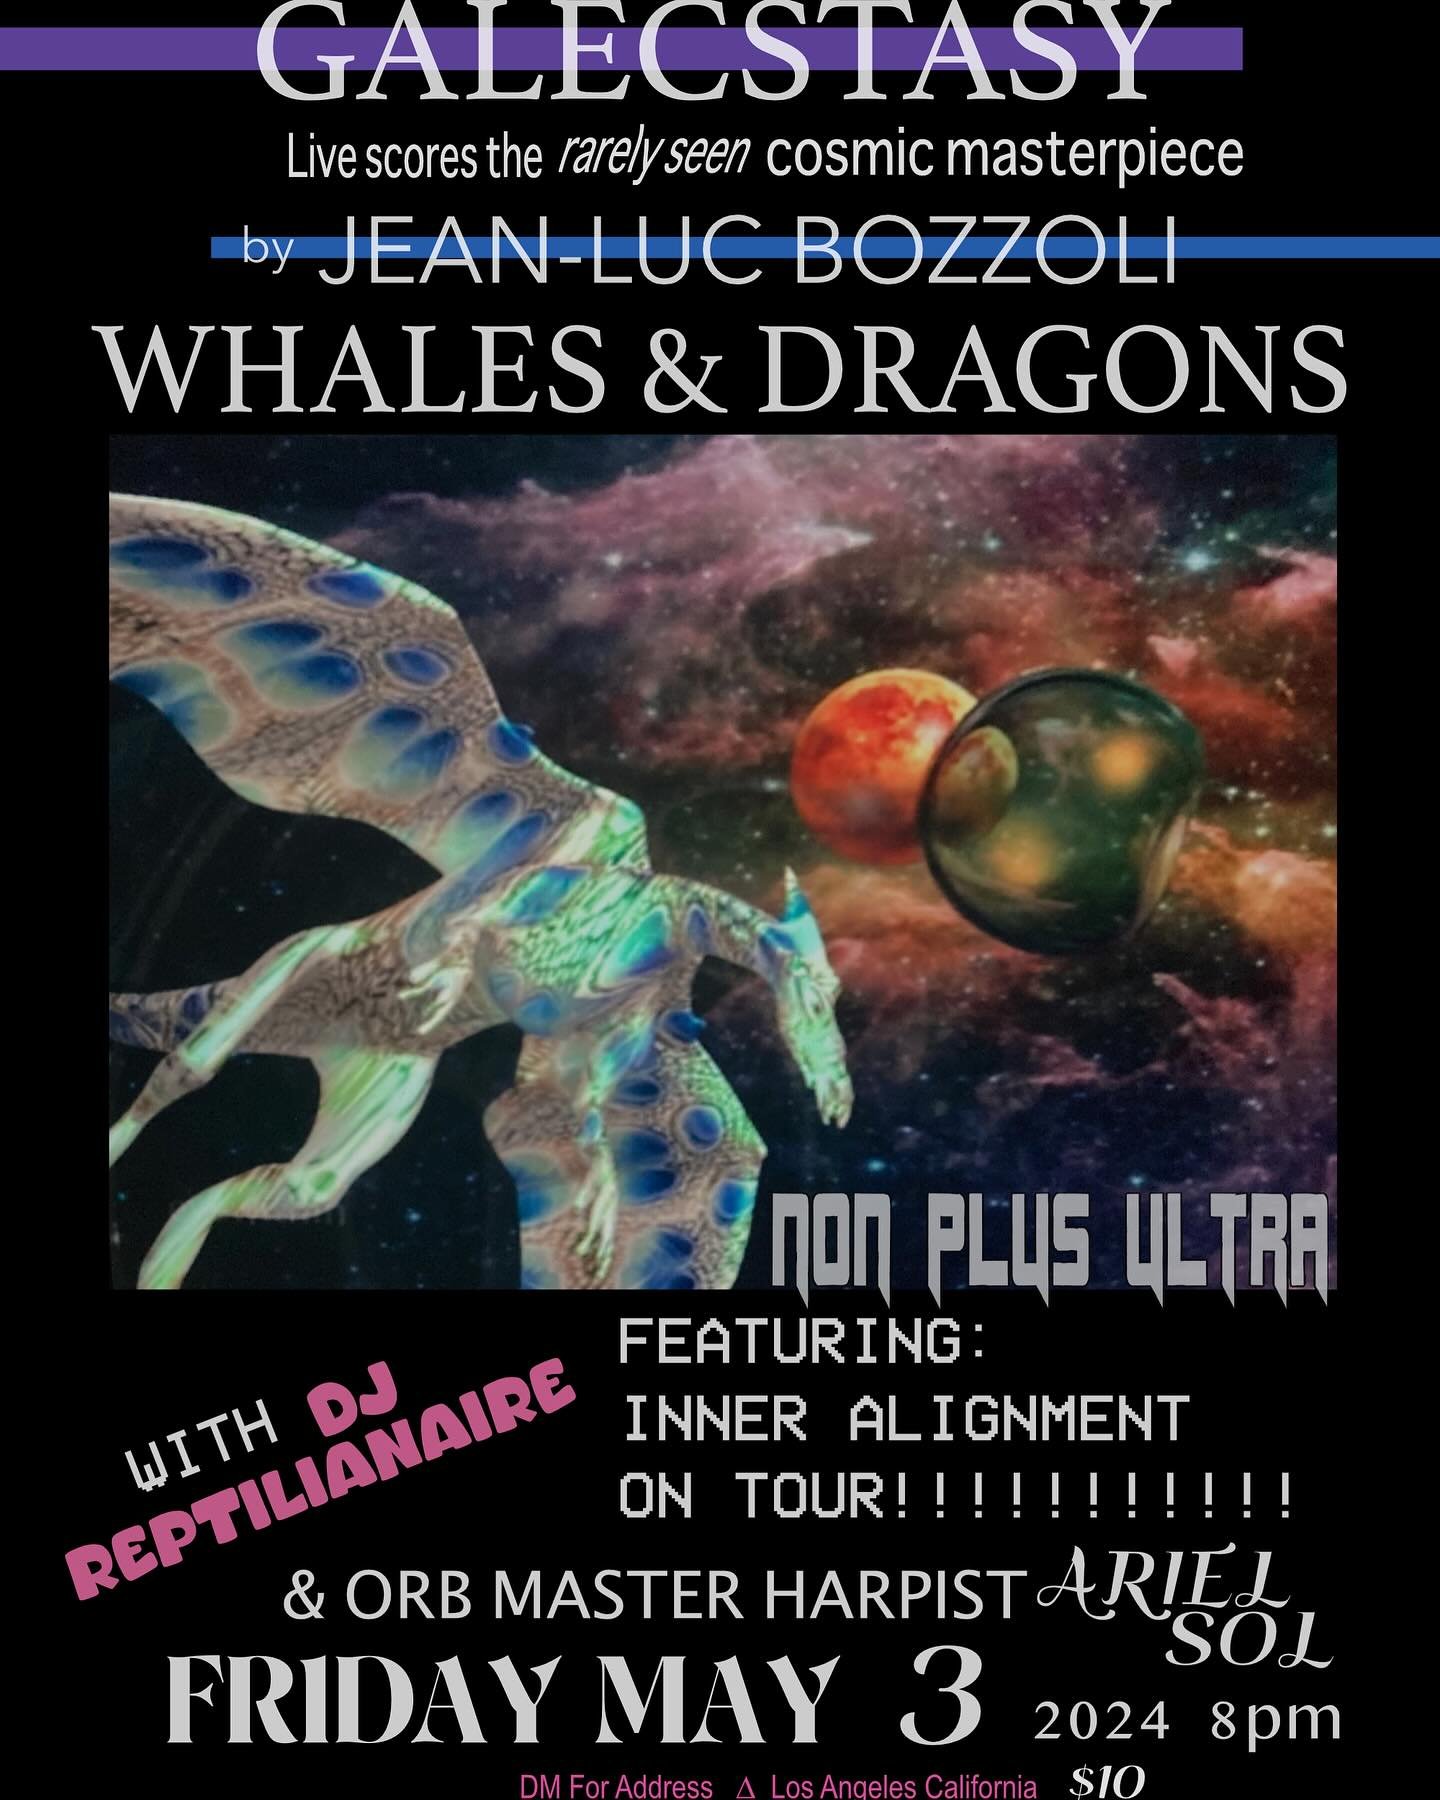 Galecstasy Presents:
WHALES &amp; DRAGONS
(FRI MAY 3 2024 8pm $10)
@nonplusultrala in L.A. ~DM for addy~
Galecstasy live scores a rare film called 
&quot;Whales and Dragons&quot; by visionary artist Jean-Luc Bozzoli - the film is a psychedelic mind-o